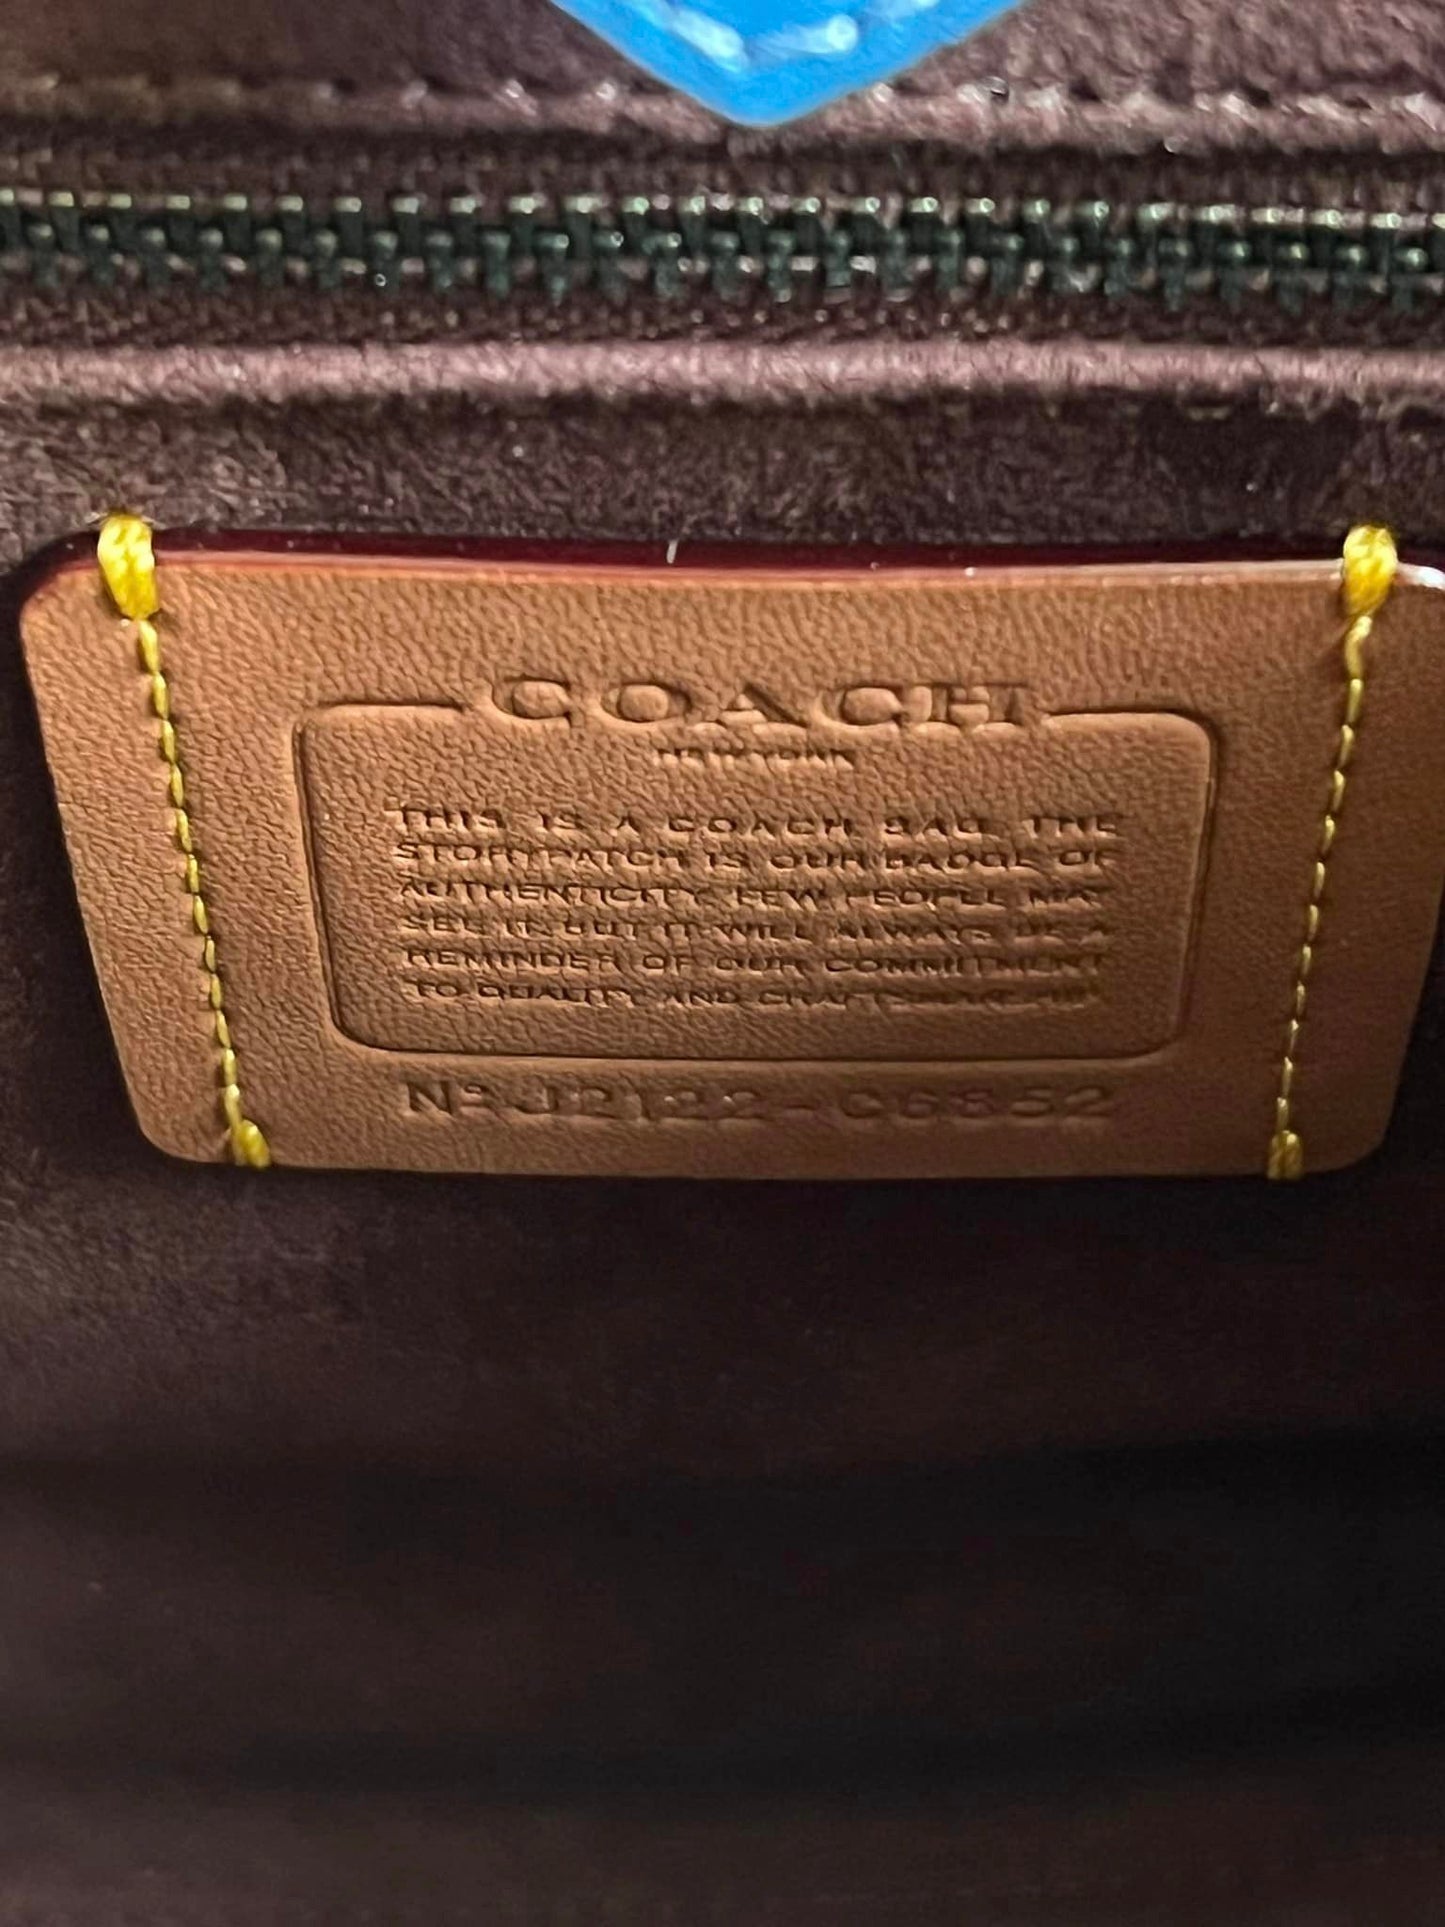 Coach Field Tote 22 with Colorblock Quilting and Coach Badge